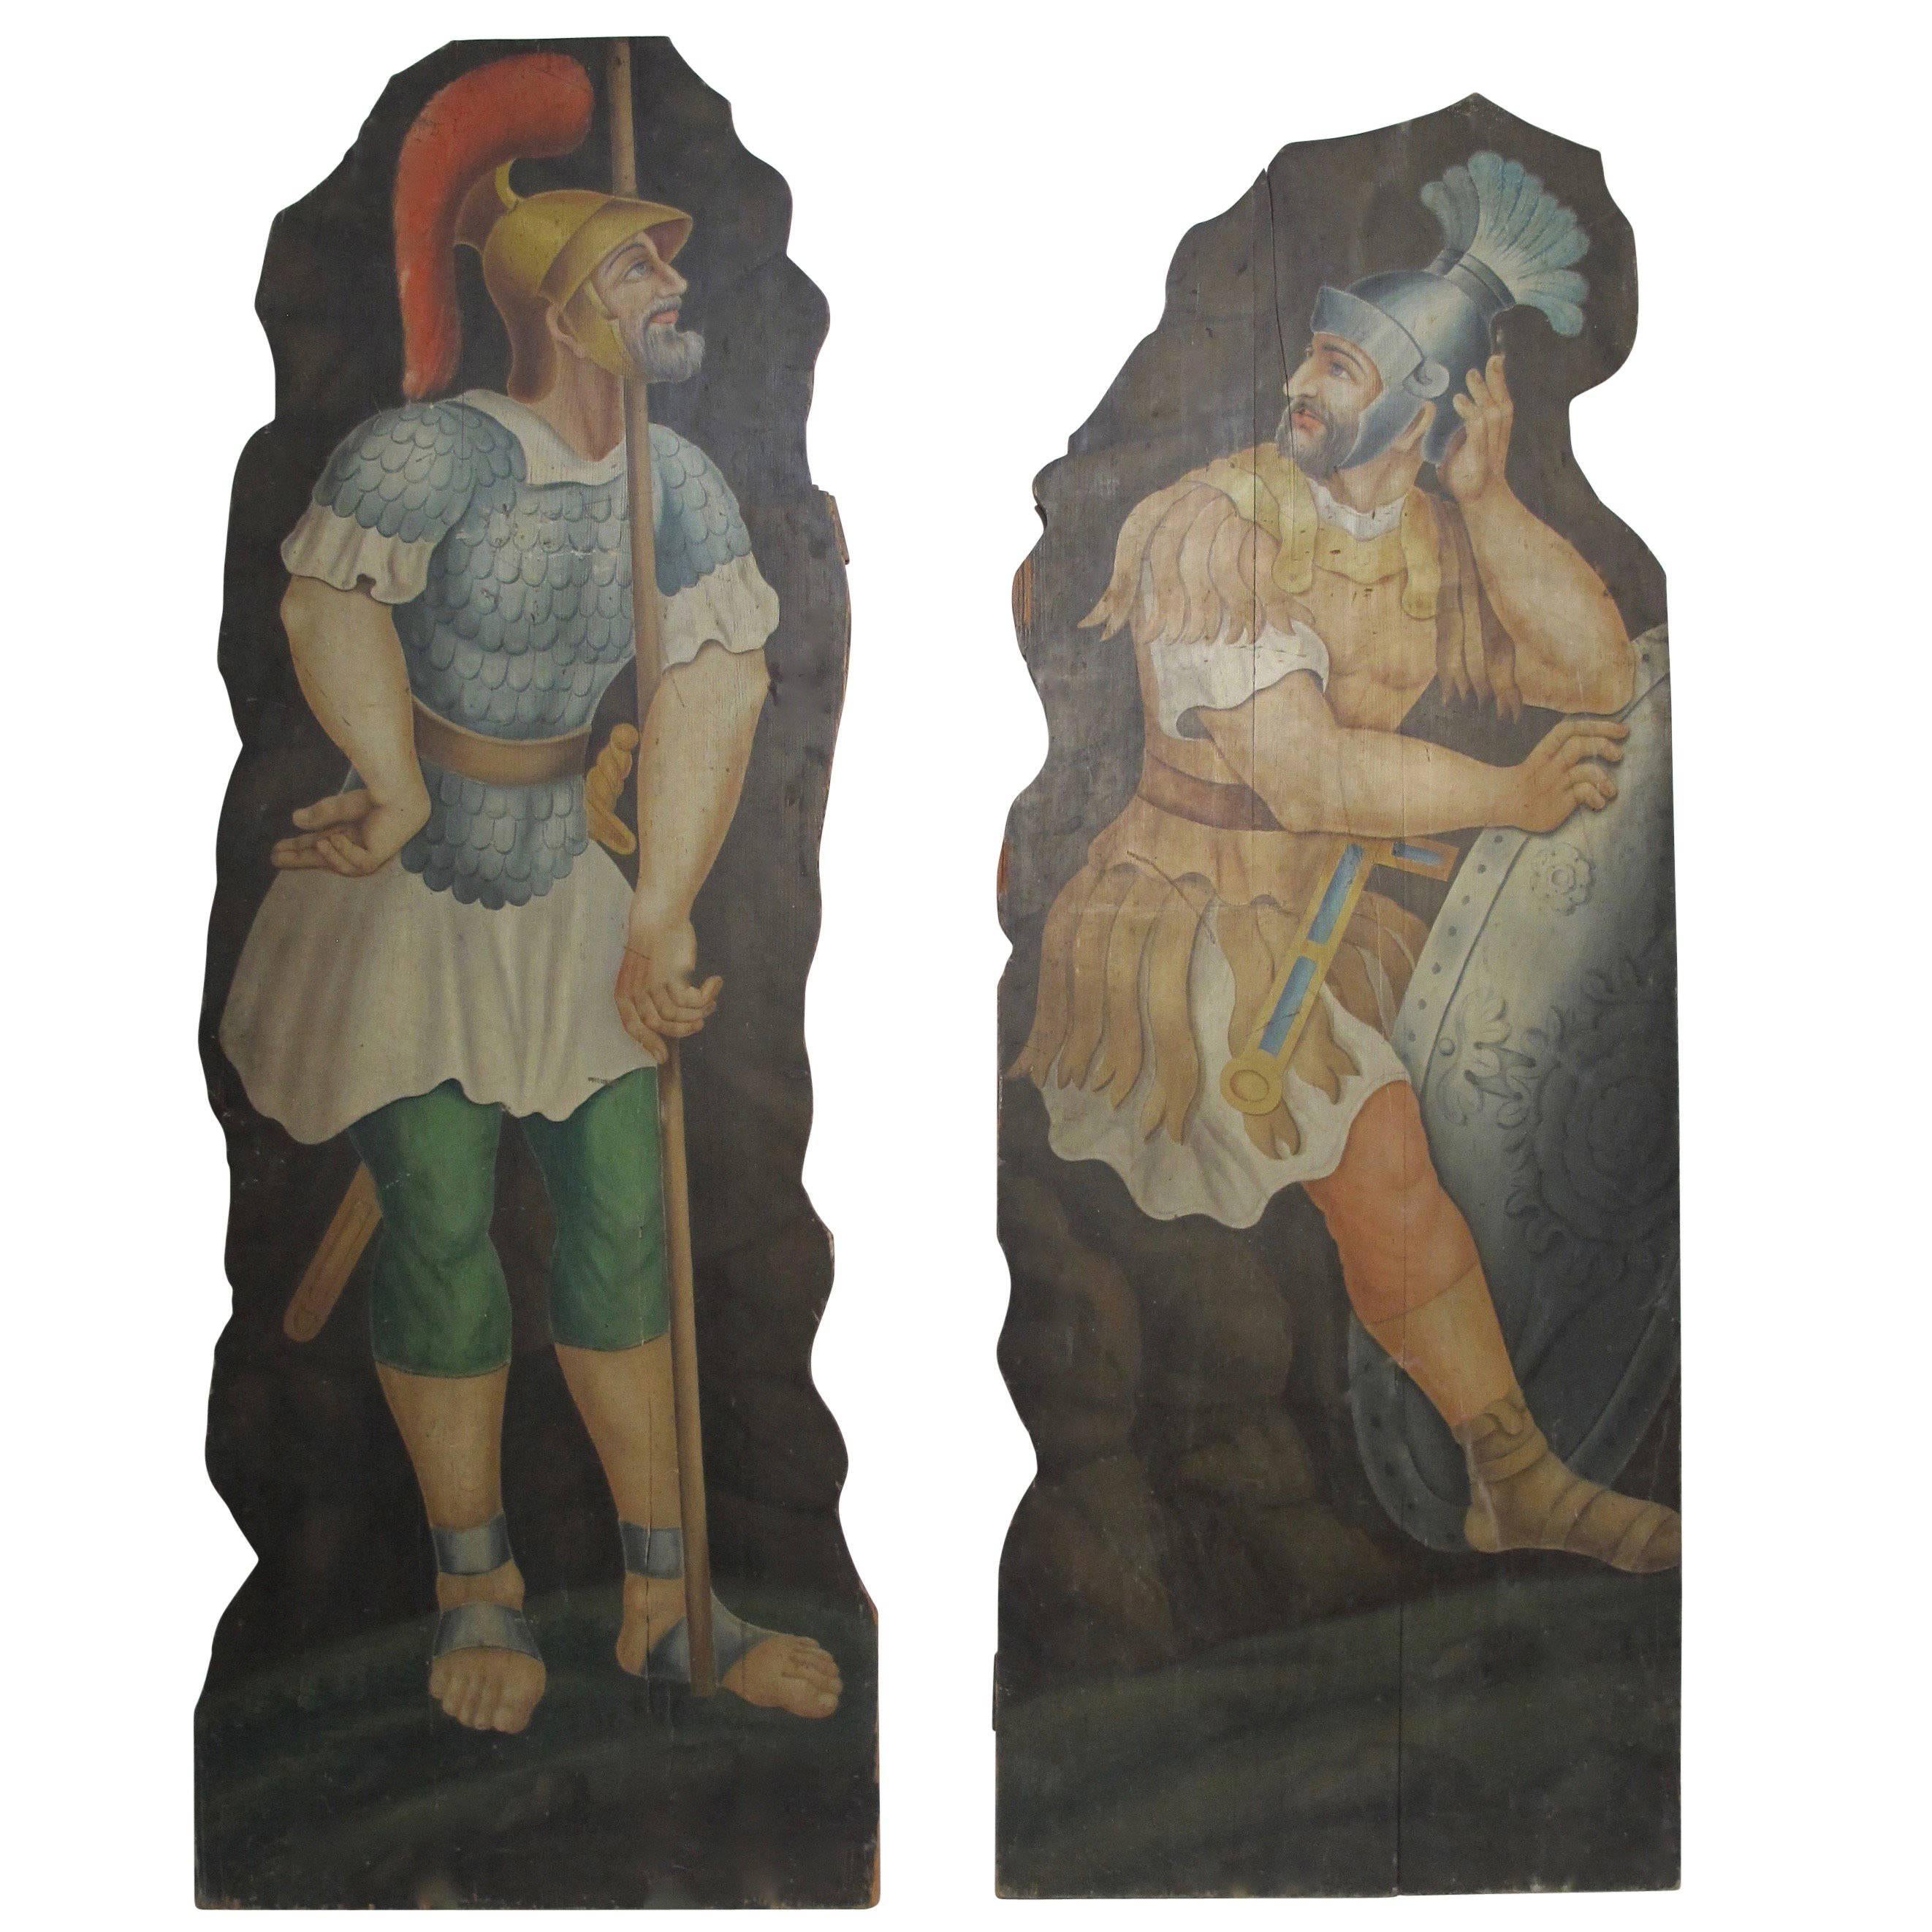 Opera or Theatre Hand-Painted on Wood Dummy Boards, 19th Century